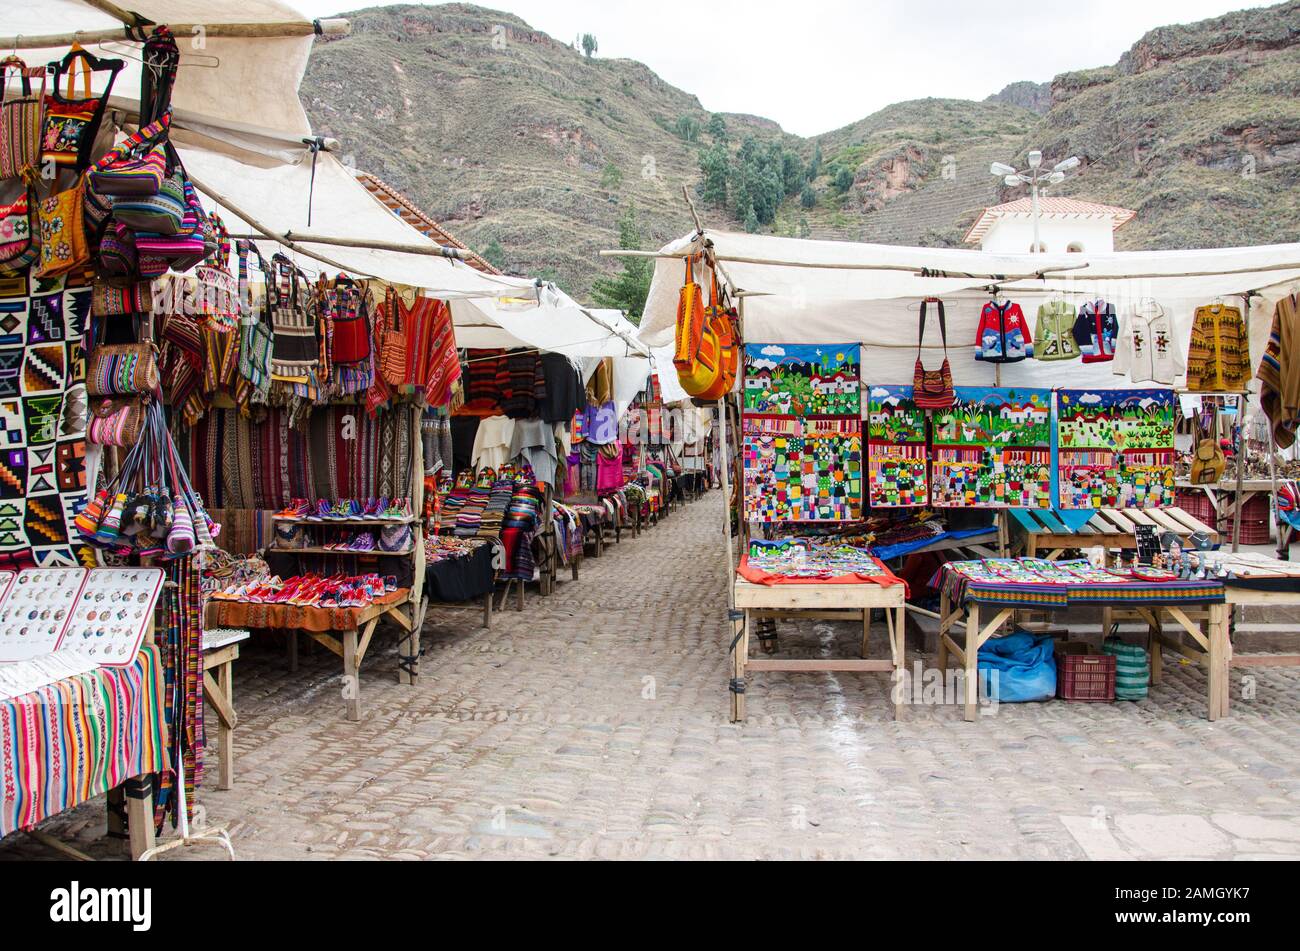 The traditional market of Pisac, Peru Stock Photo